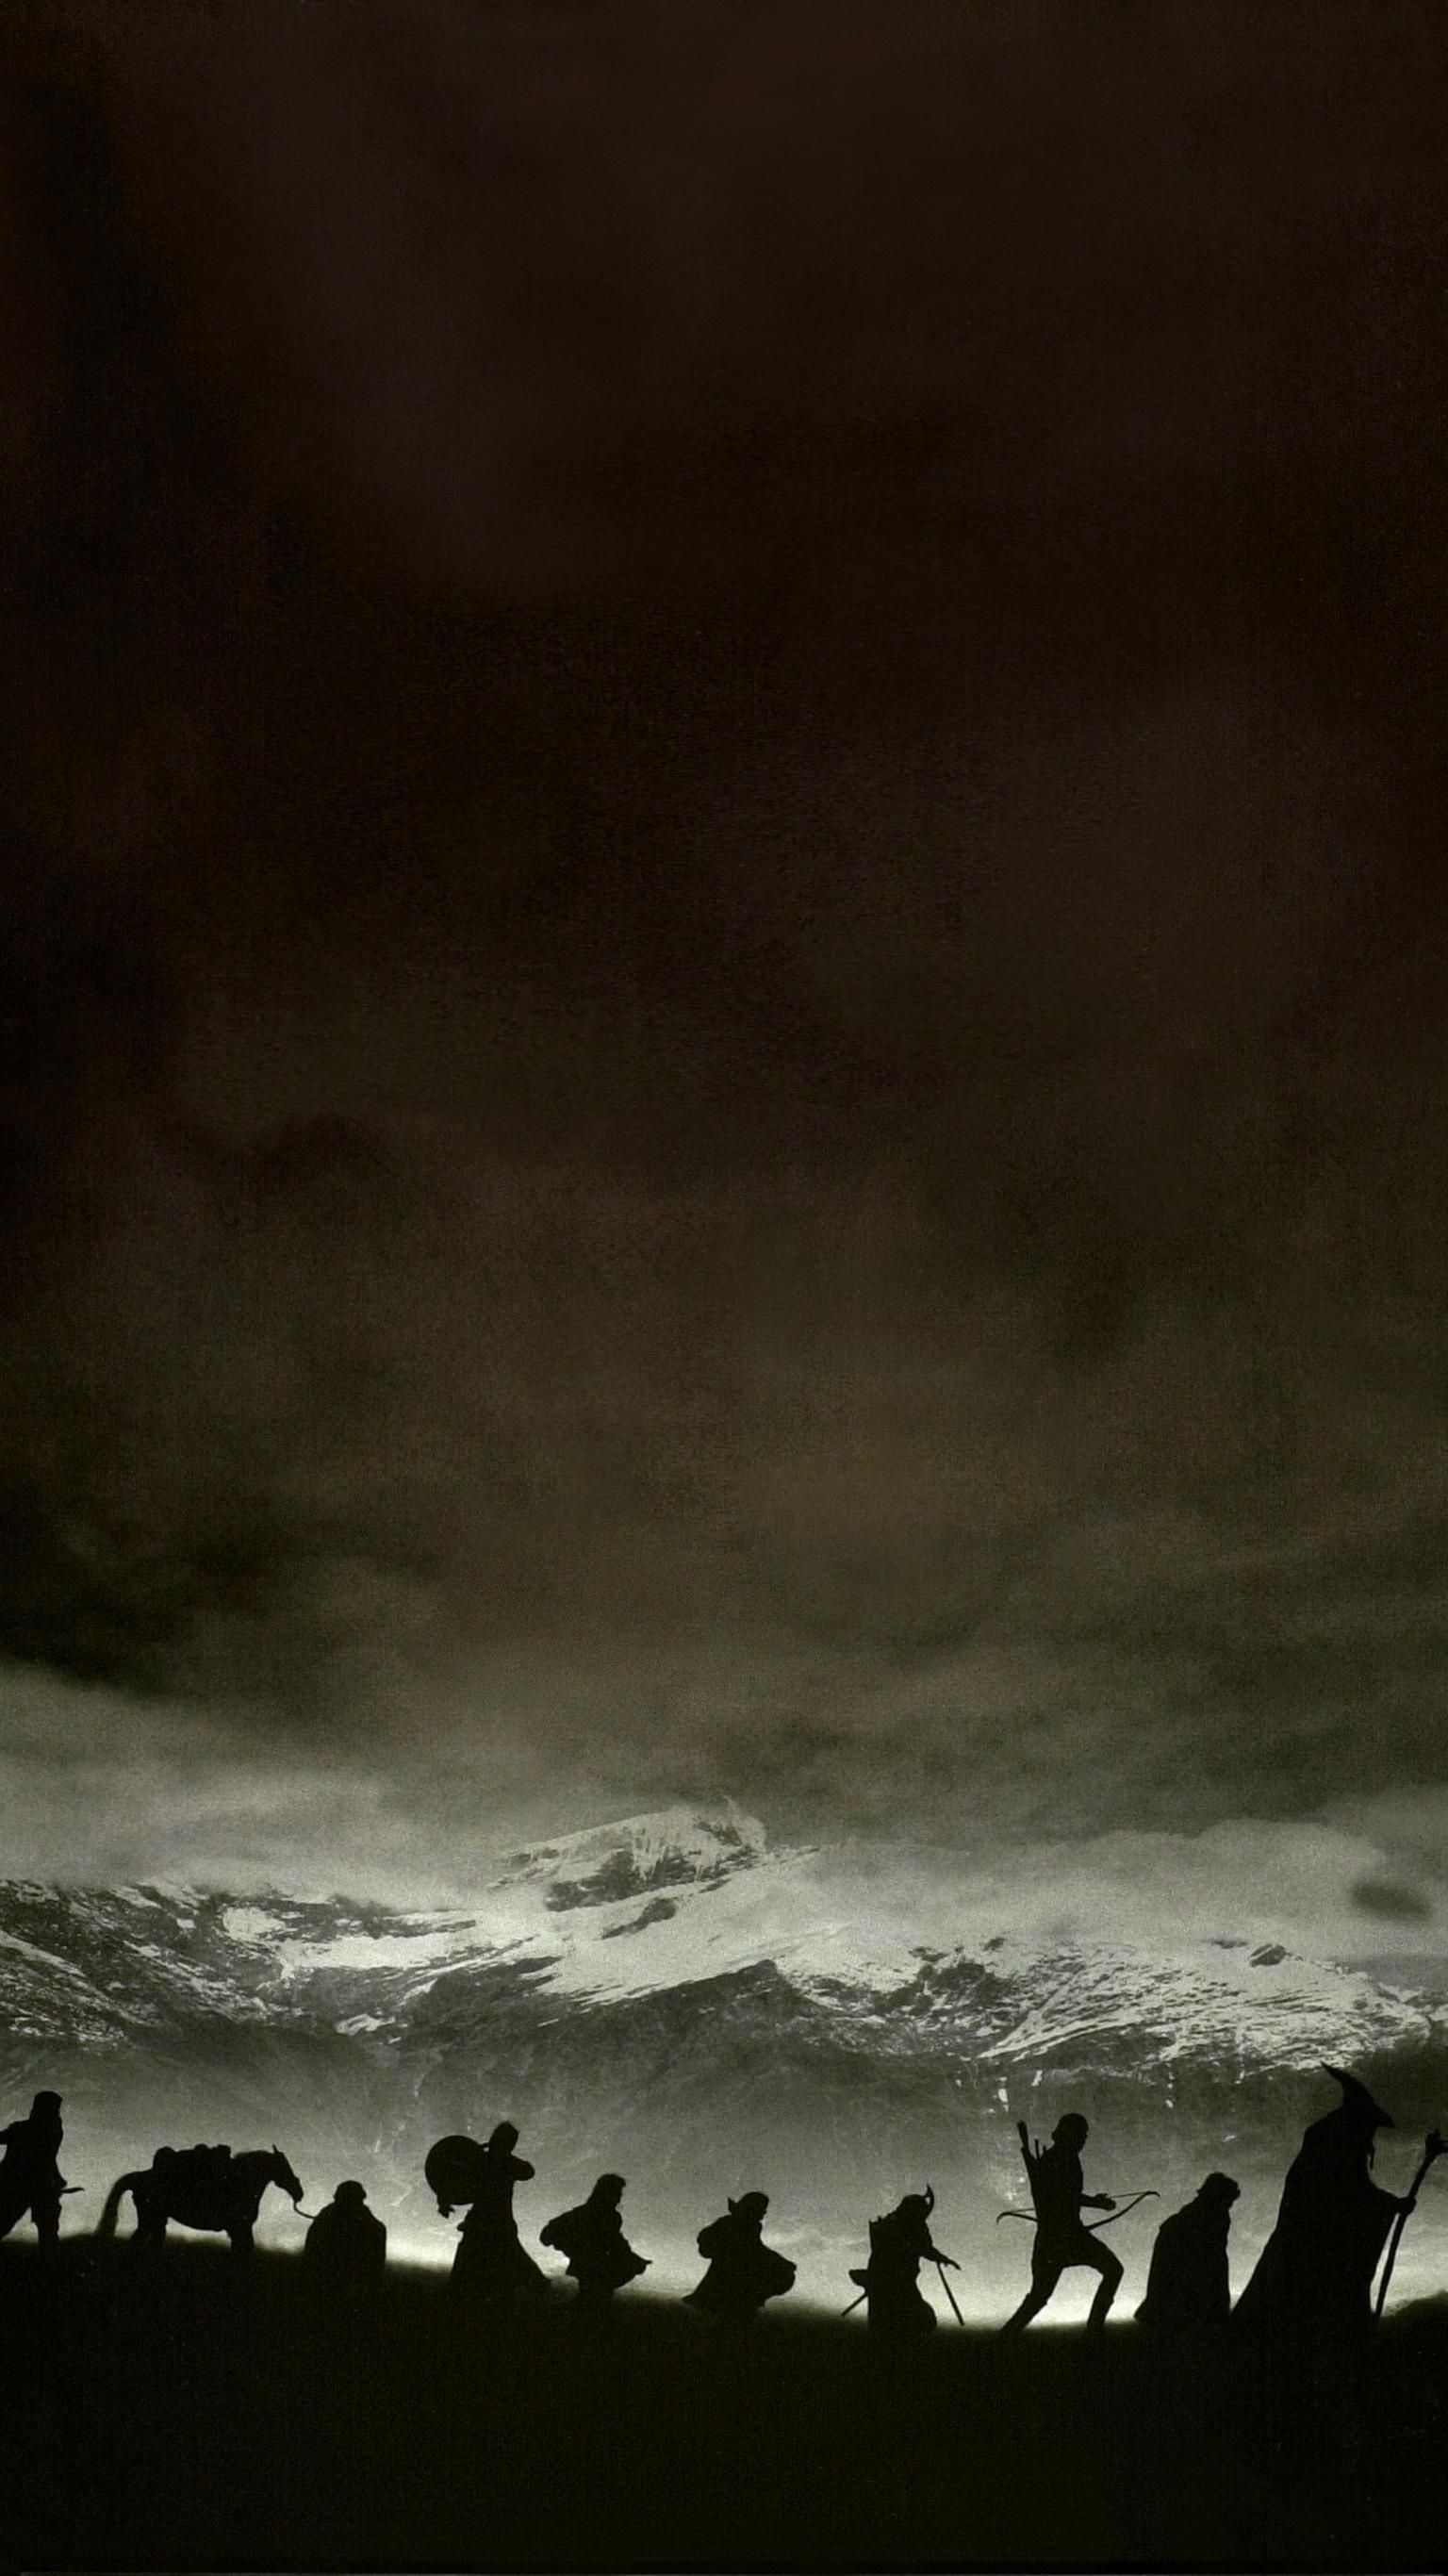 The Lord Of The Rings 4k Mobile Wallpapers - Wallpaper Cave